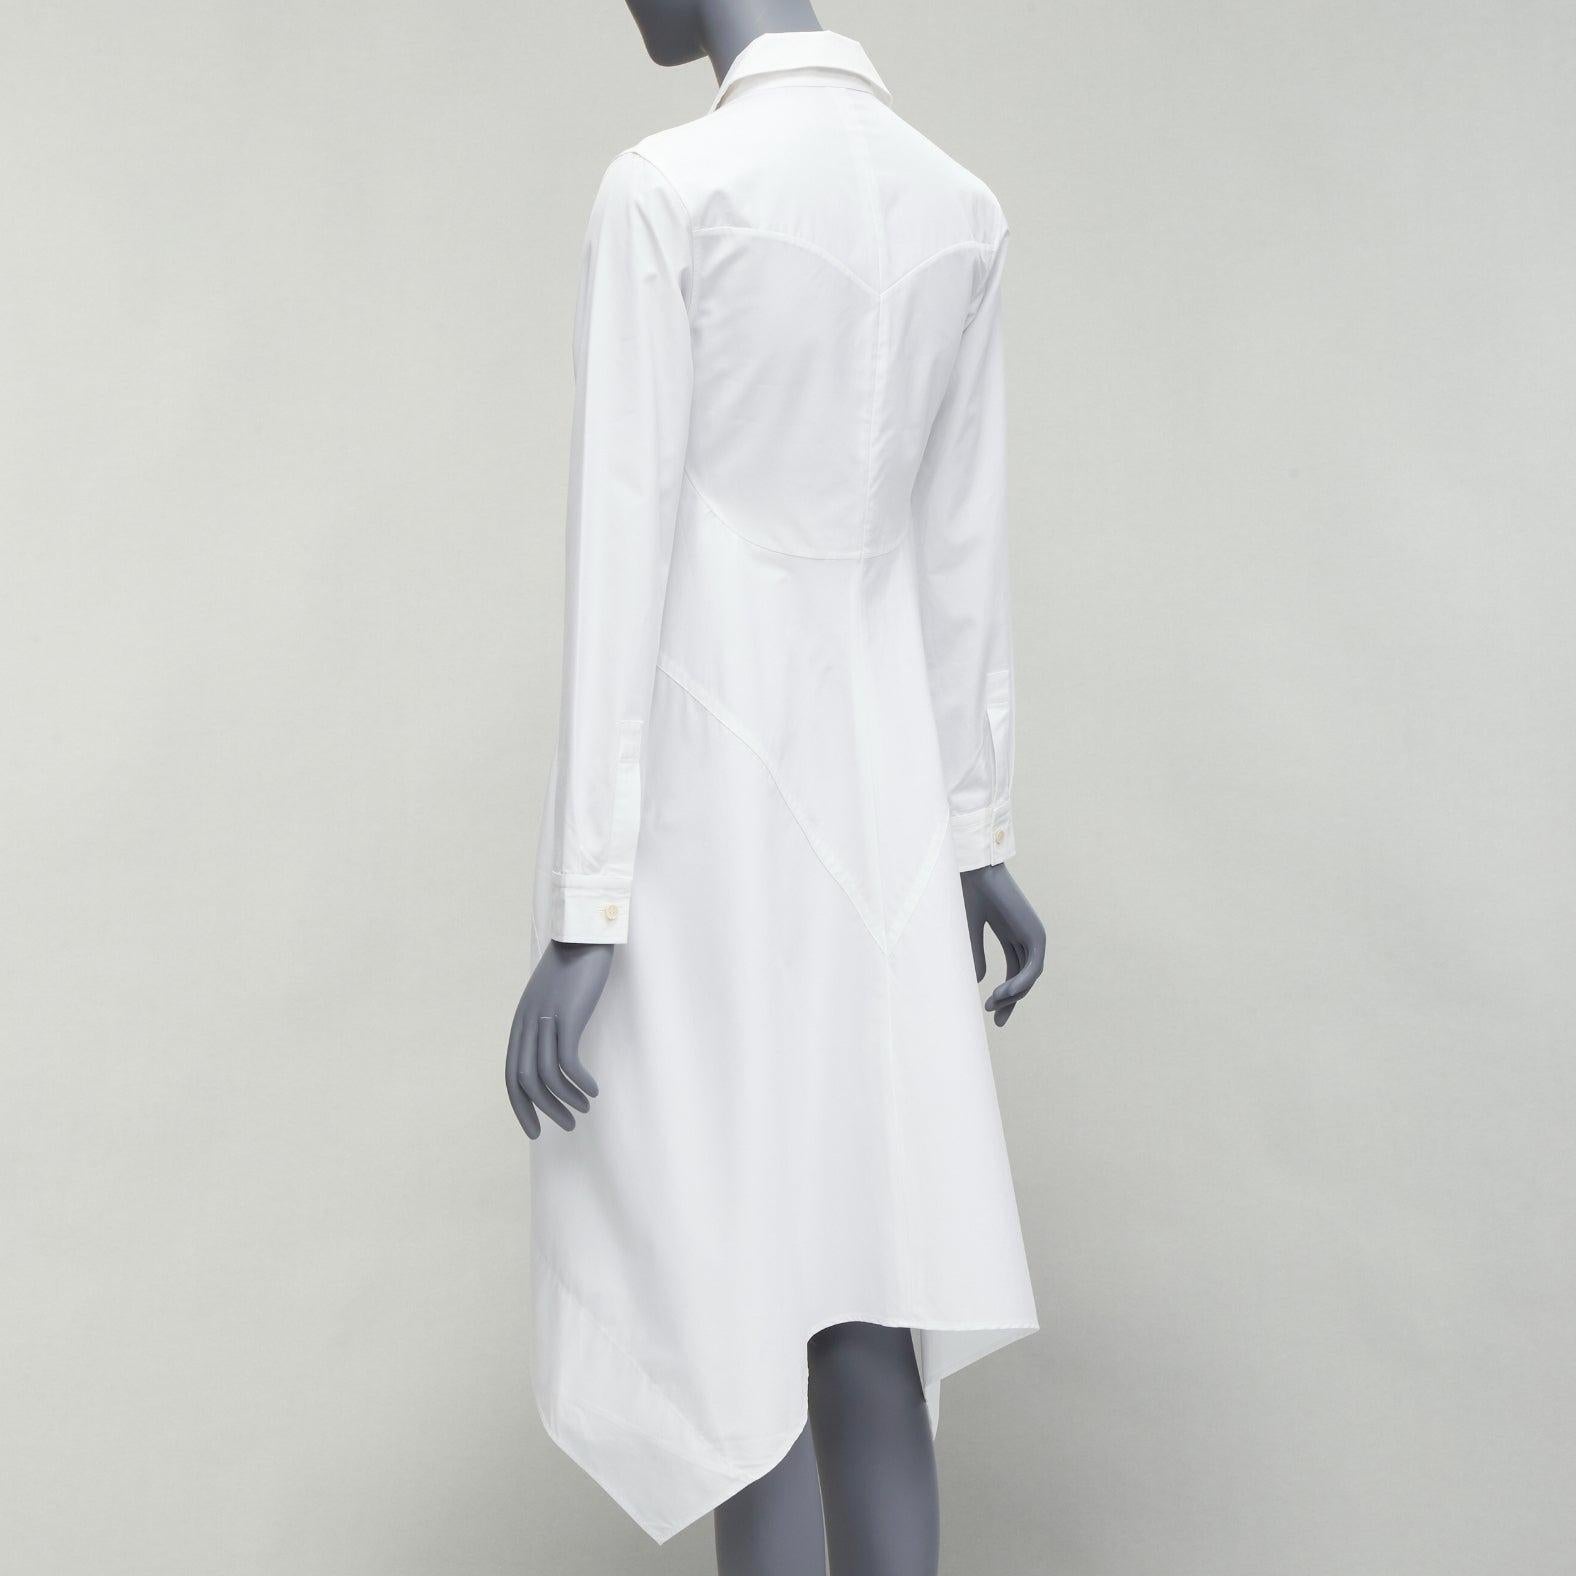 JIL SANDER 2014 white bias panels high low hem shirt dress FR32 XS
Reference: SNKO/A00272
Brand: Jil Sander
Collection: 2014
Material: Cotton
Color: White
Pattern: Solid
Closure: Button
Extra Details: Bias panels that hug the body at back.
Made in: